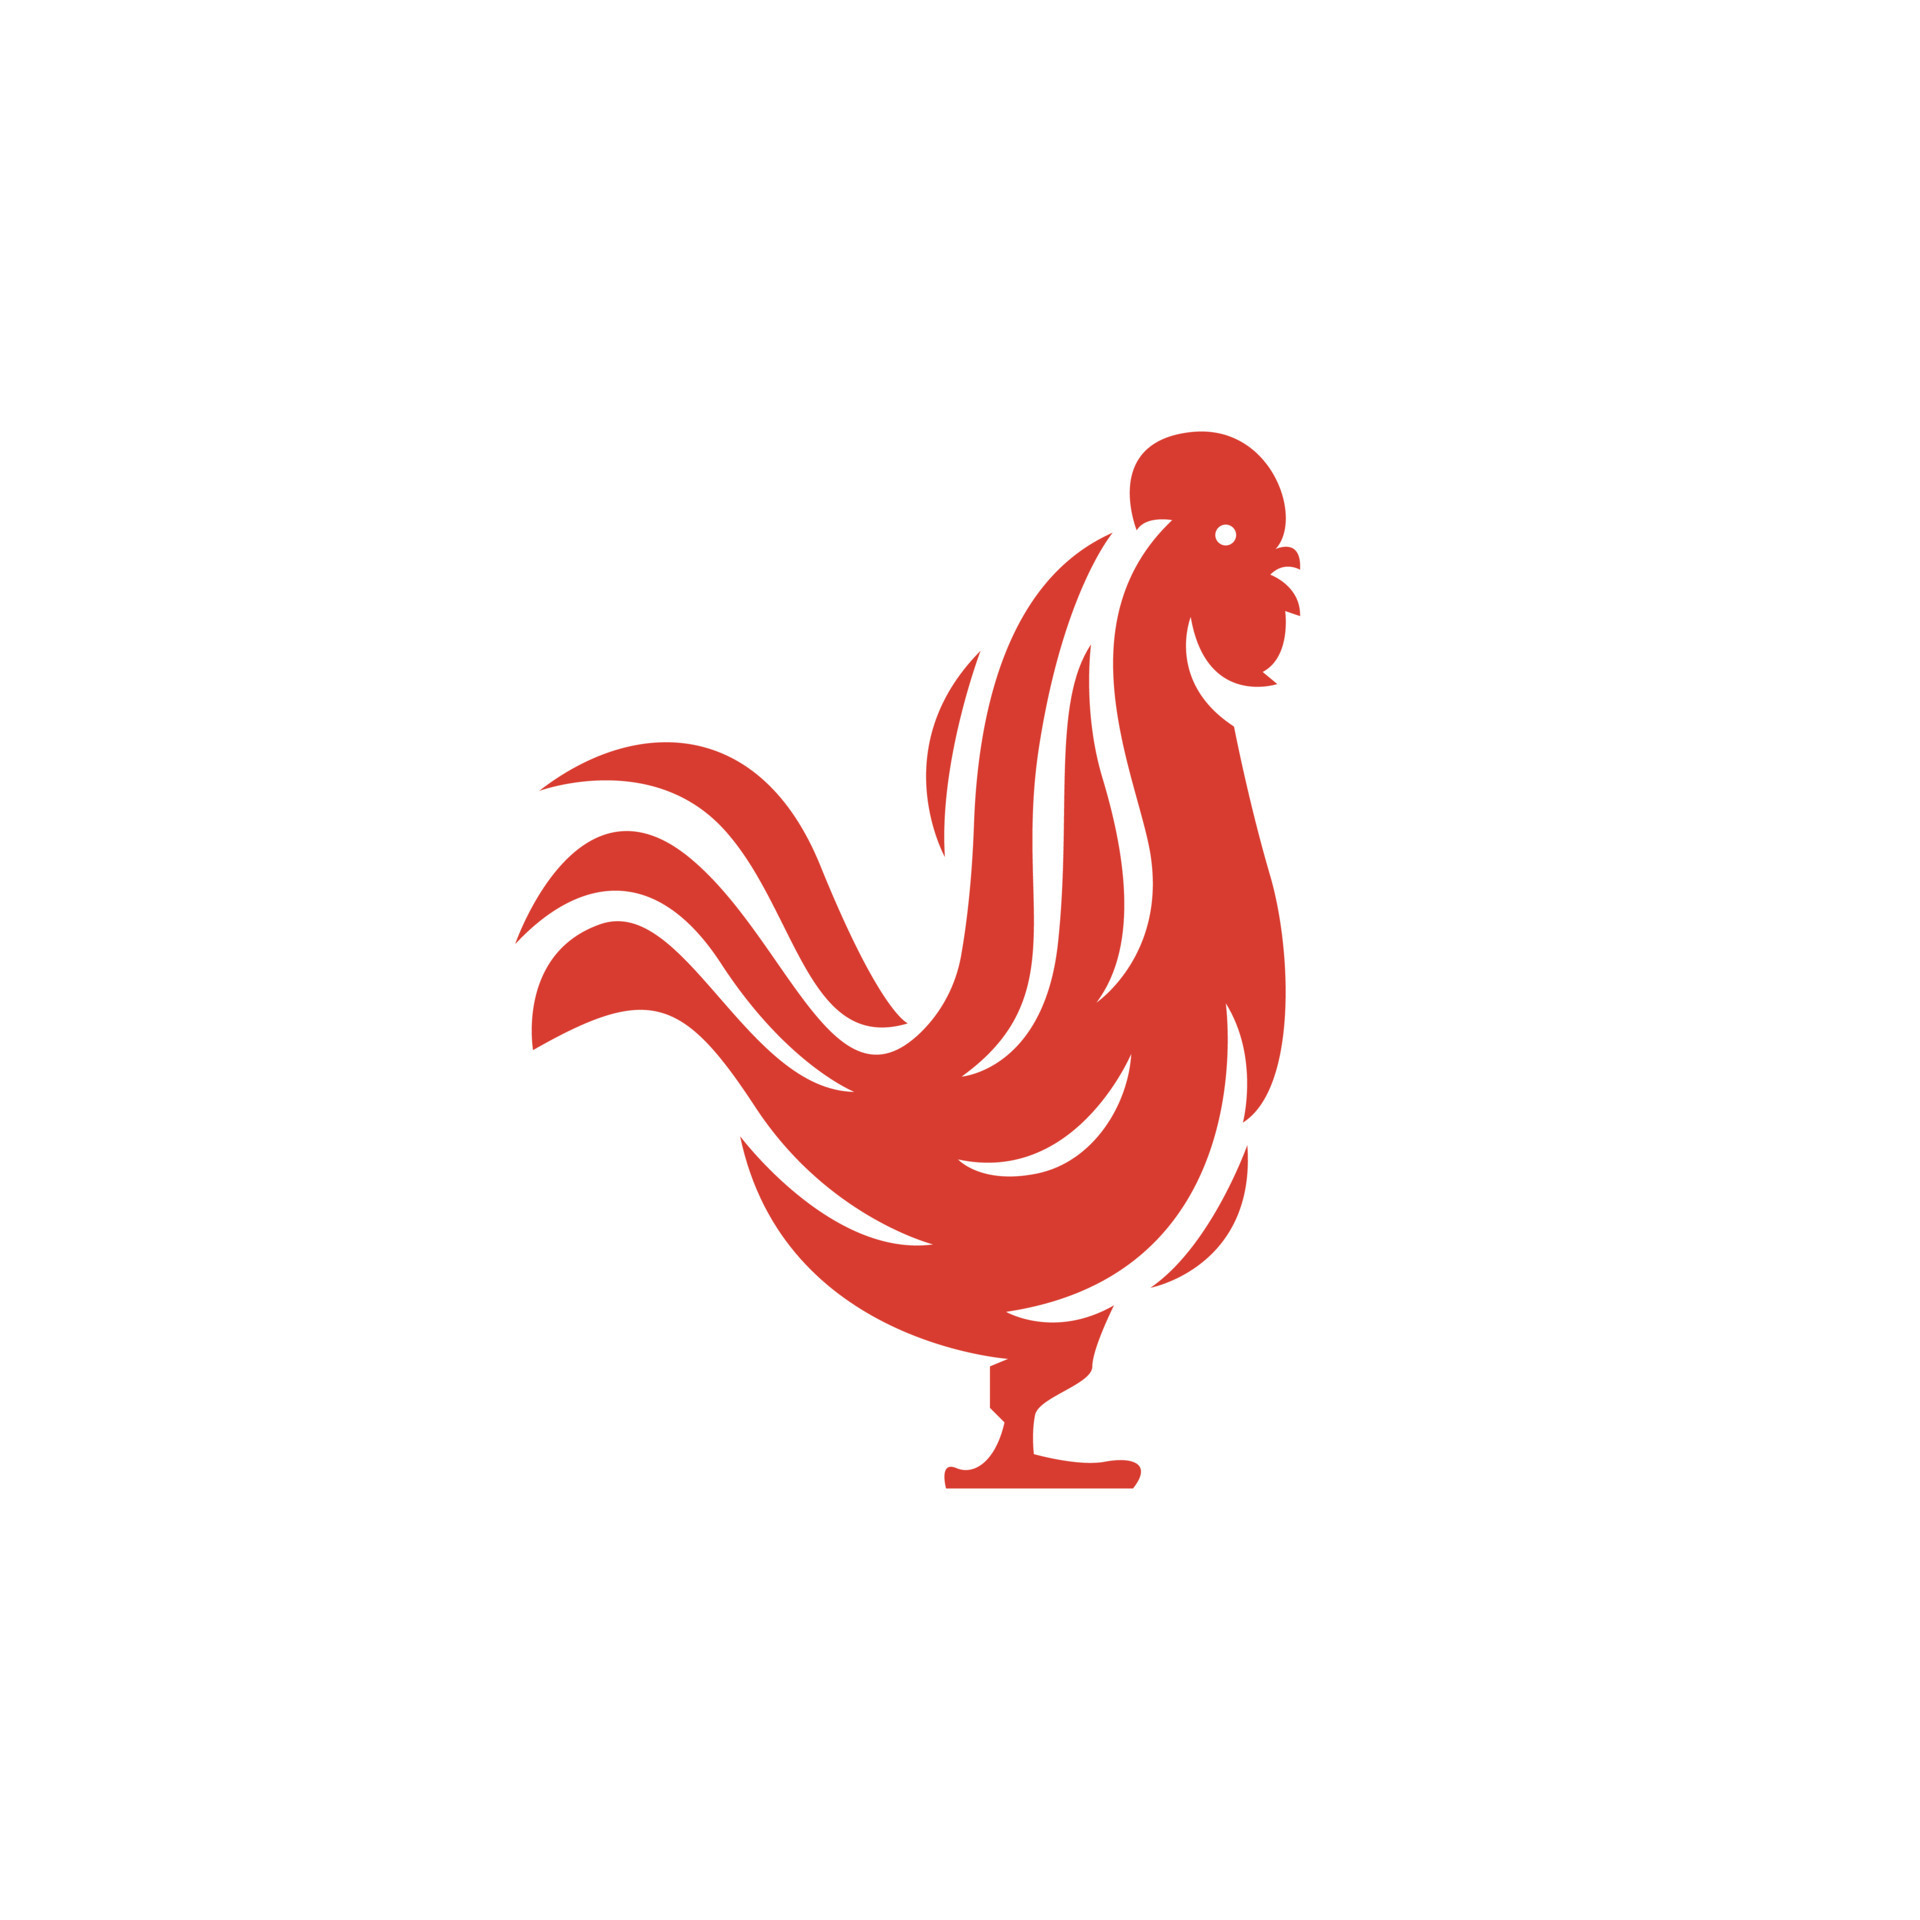 Rooster logo icon vector illustration on white background 7785067 ...